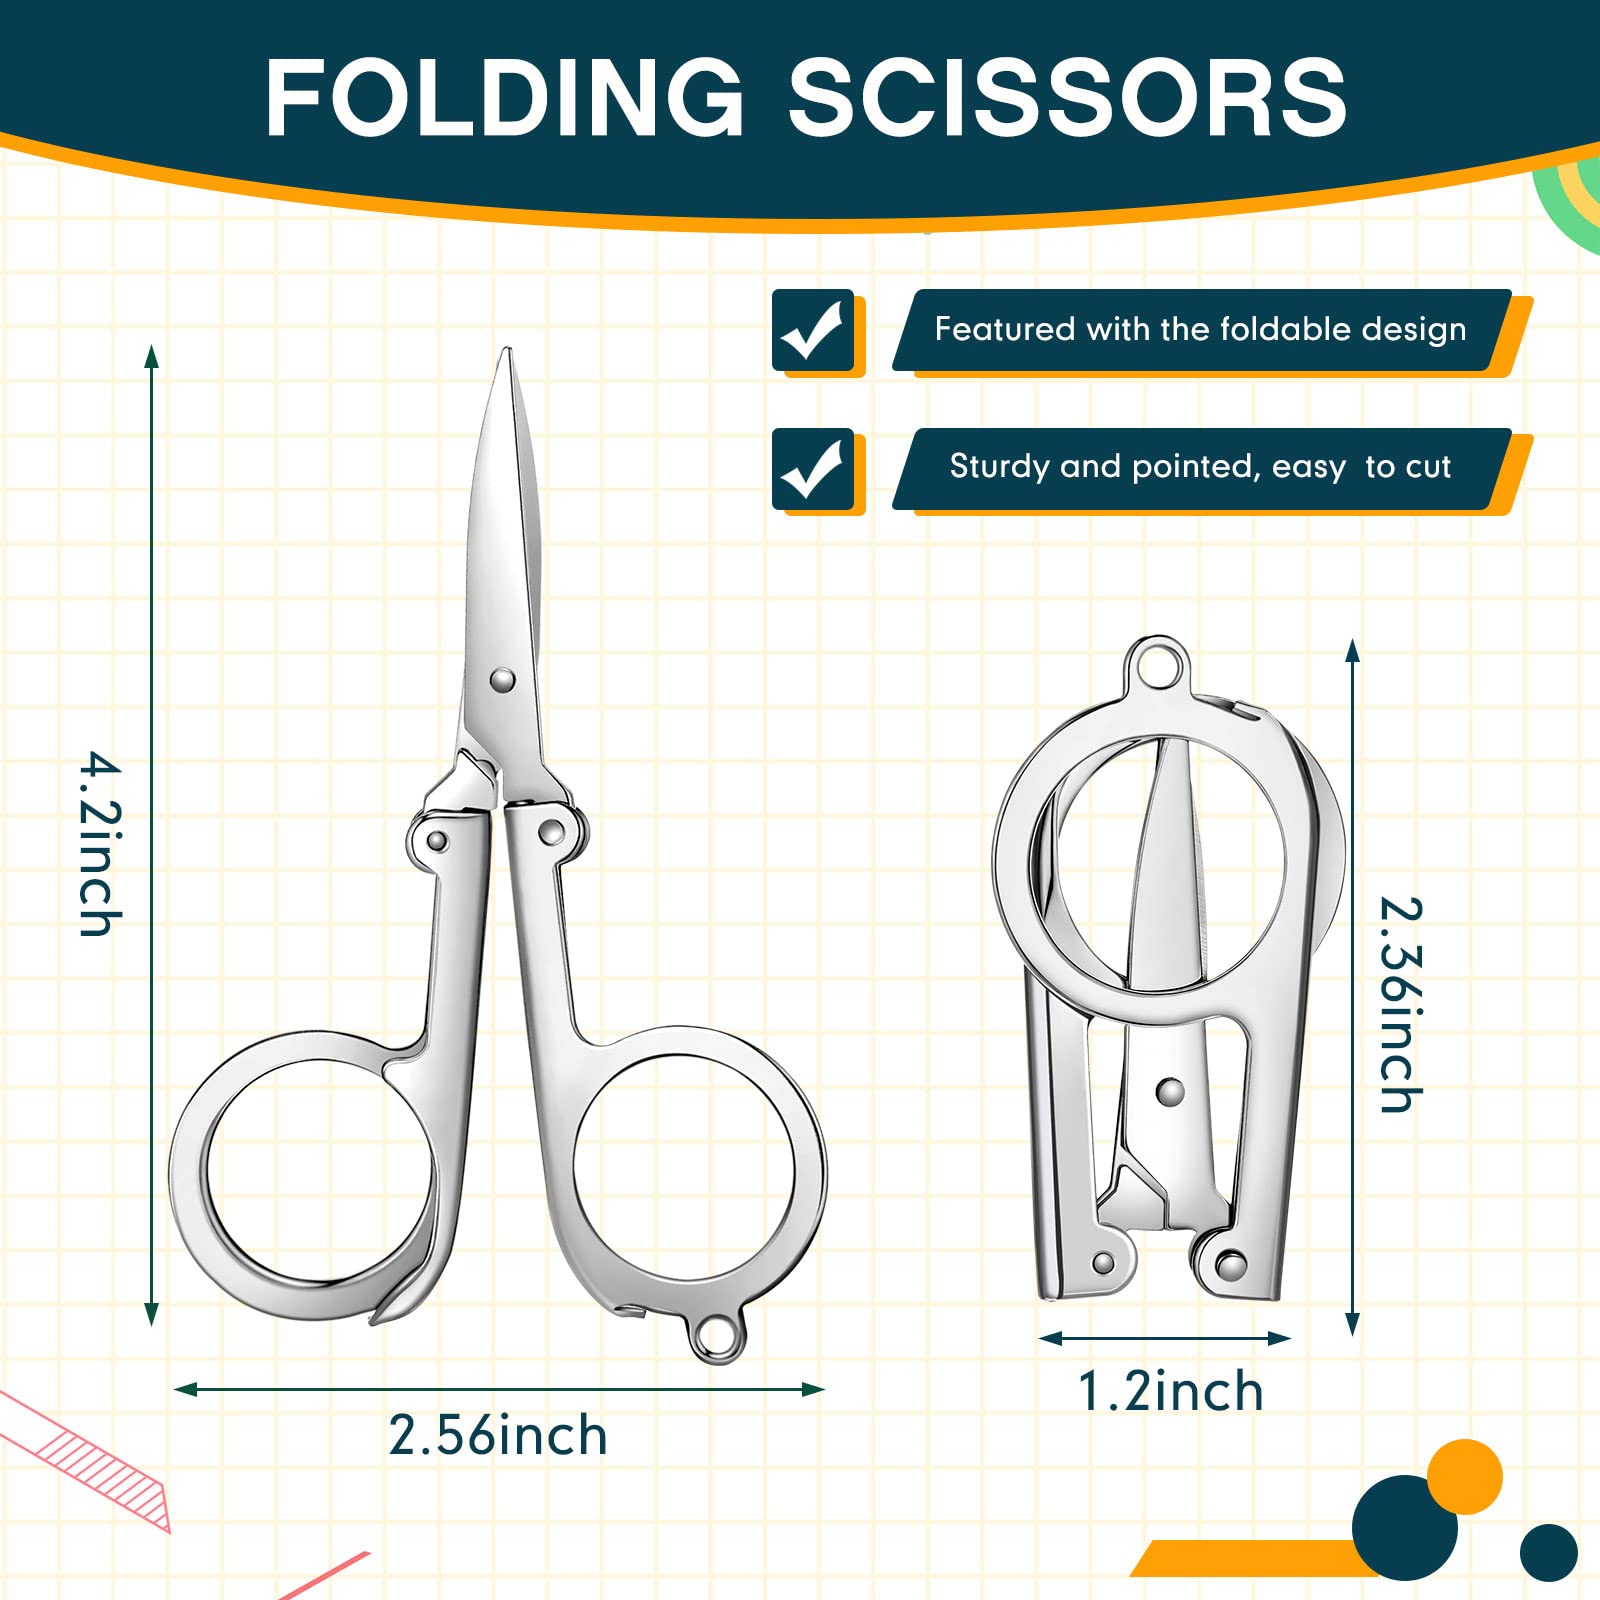 Chumia 50 Pcs Stainless Steel Small Folding Scissors Portable Mini Scissors Tiny Travel Scissors Foldable Pocket Scissors for Craft Office School Outdoors Home Camping Hanging